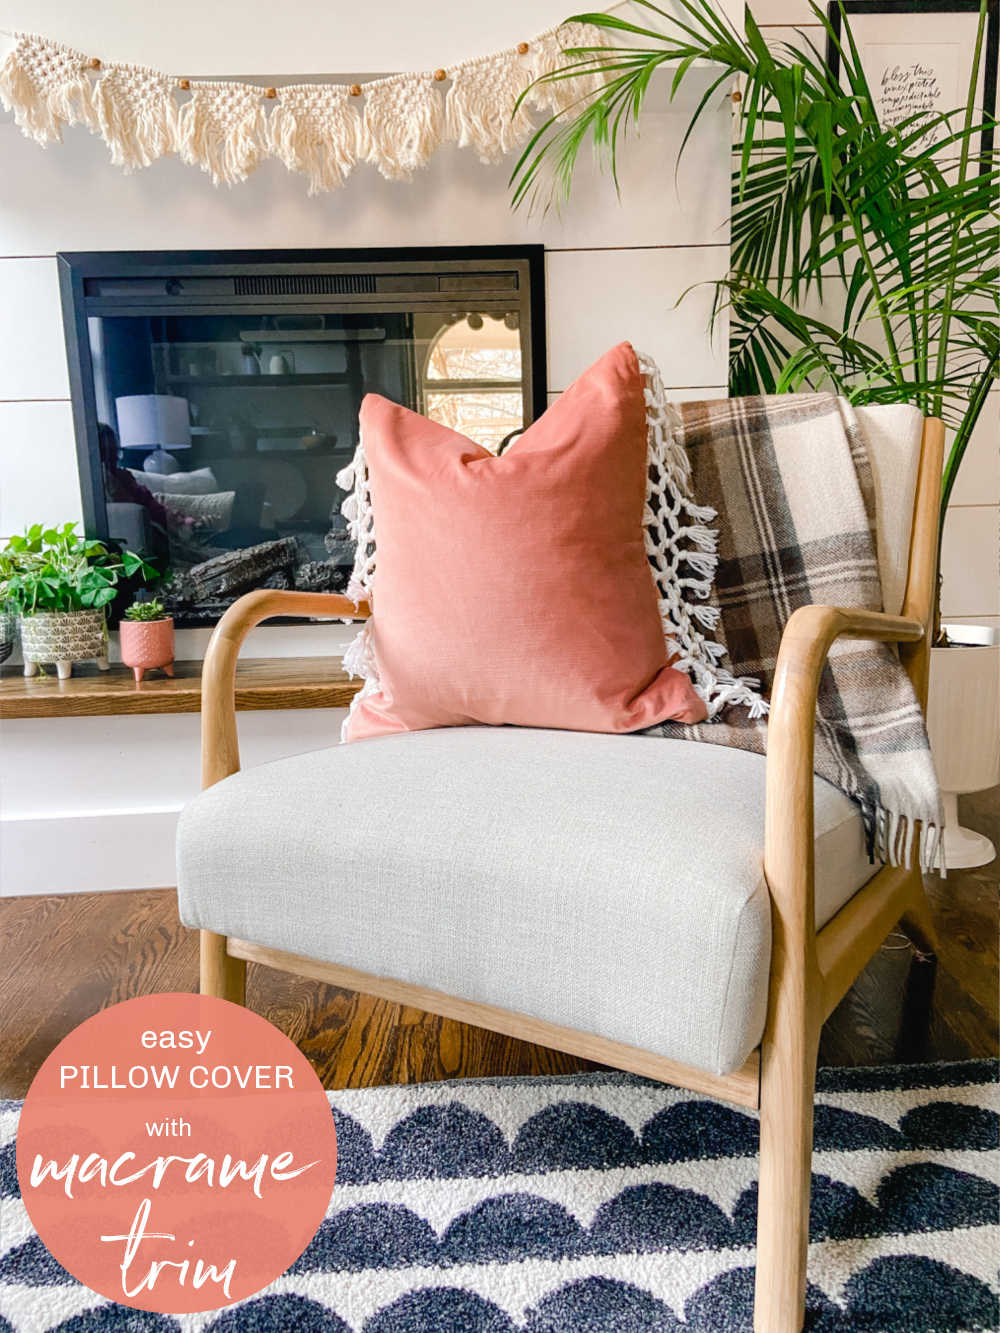 Envelope Pillow Cover with Macrame Fringe Trim. Add a little boho detail to your next pillow with this easy fringe idea and easy pillow!